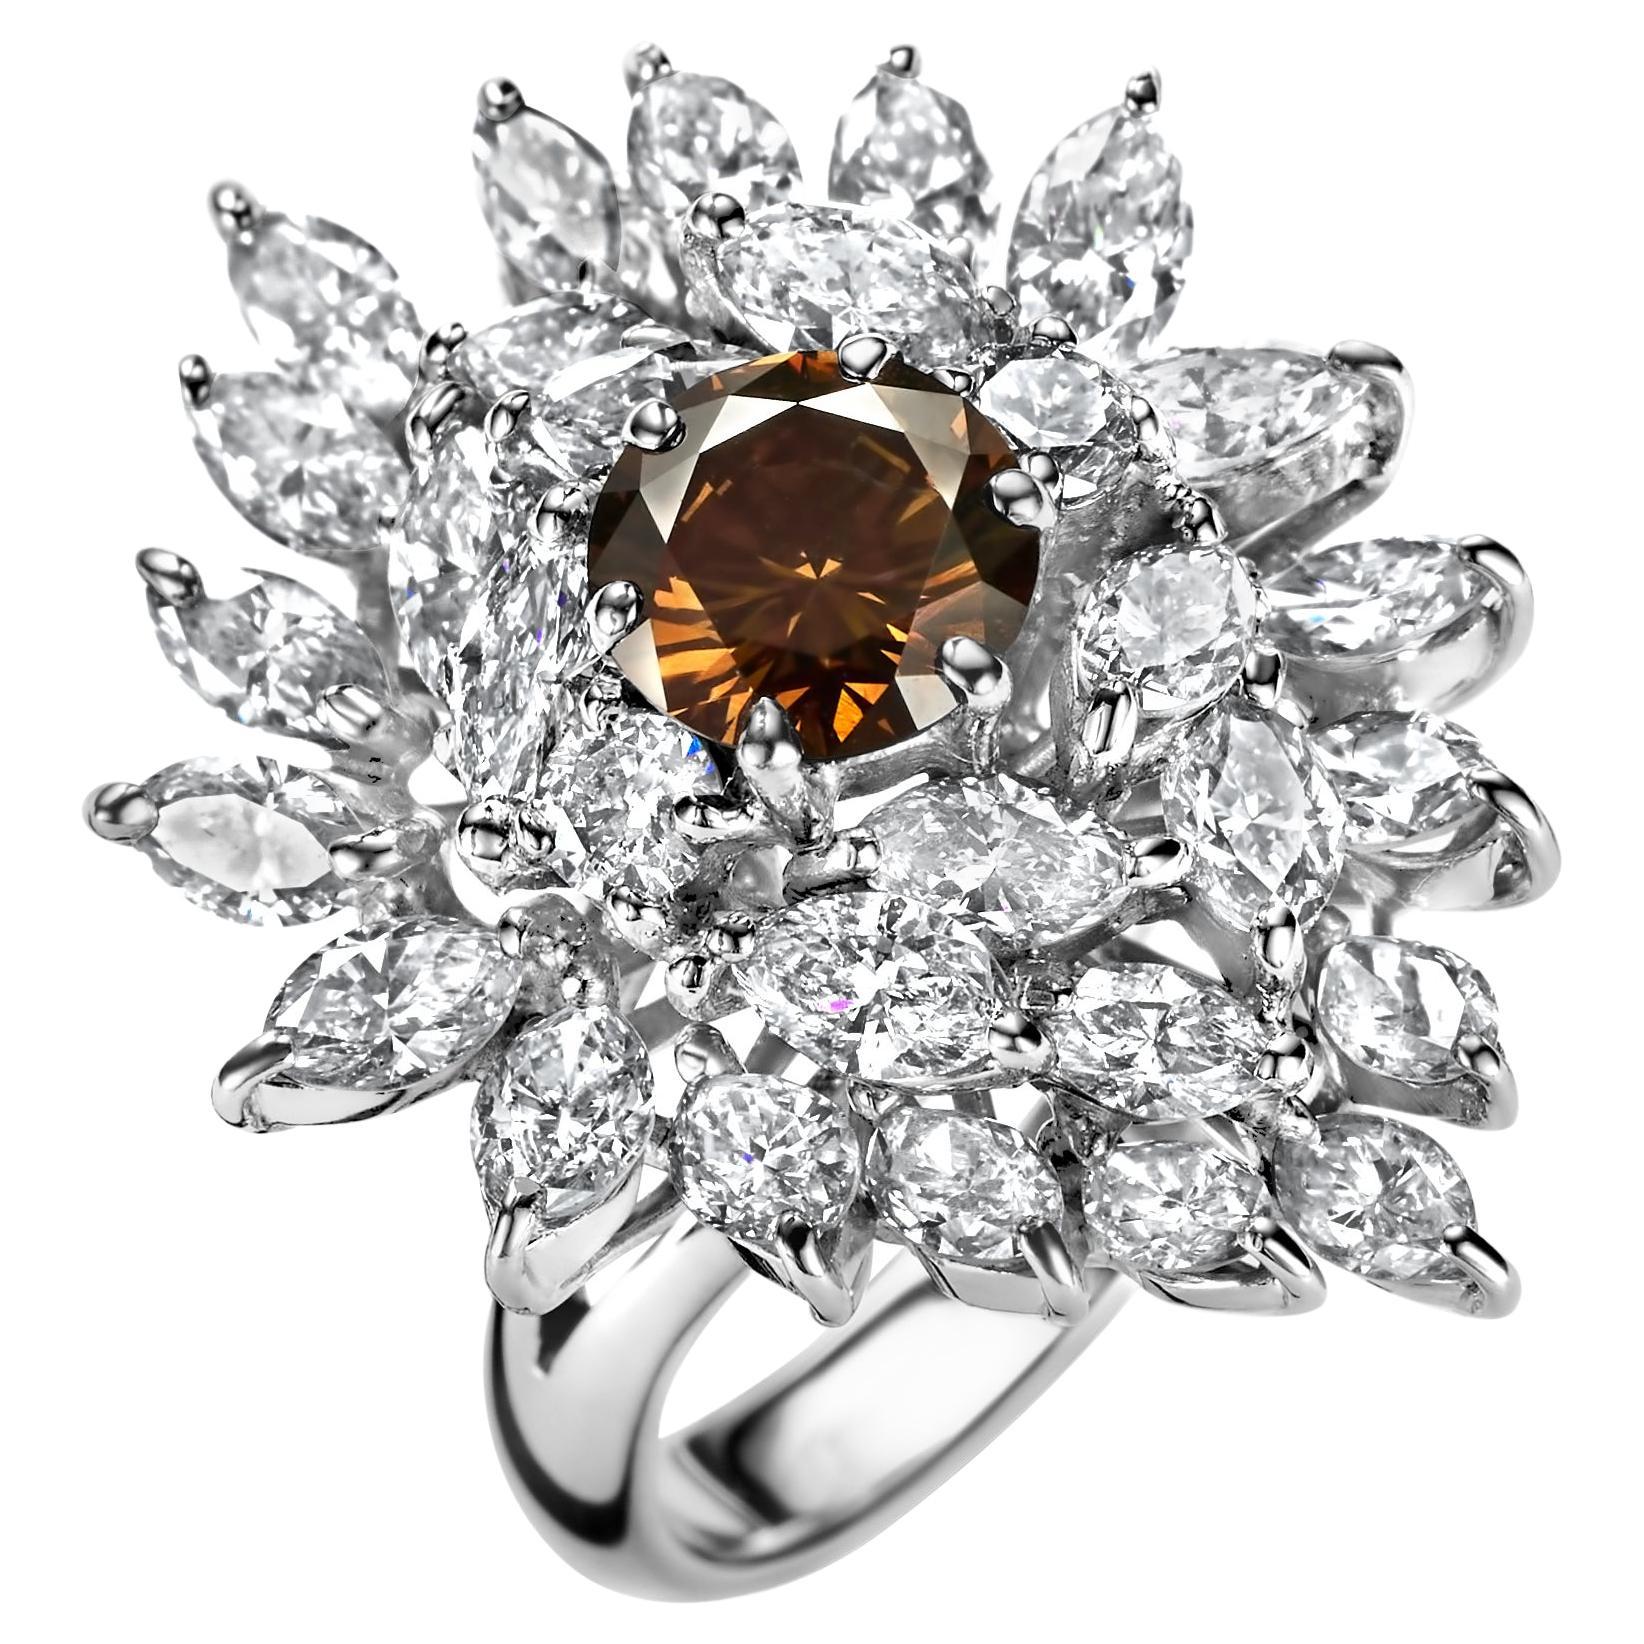 18kt White Gold Ring with 1.4ct Brown Diamond, Marquise & Brilliant Cut Diamonds For Sale